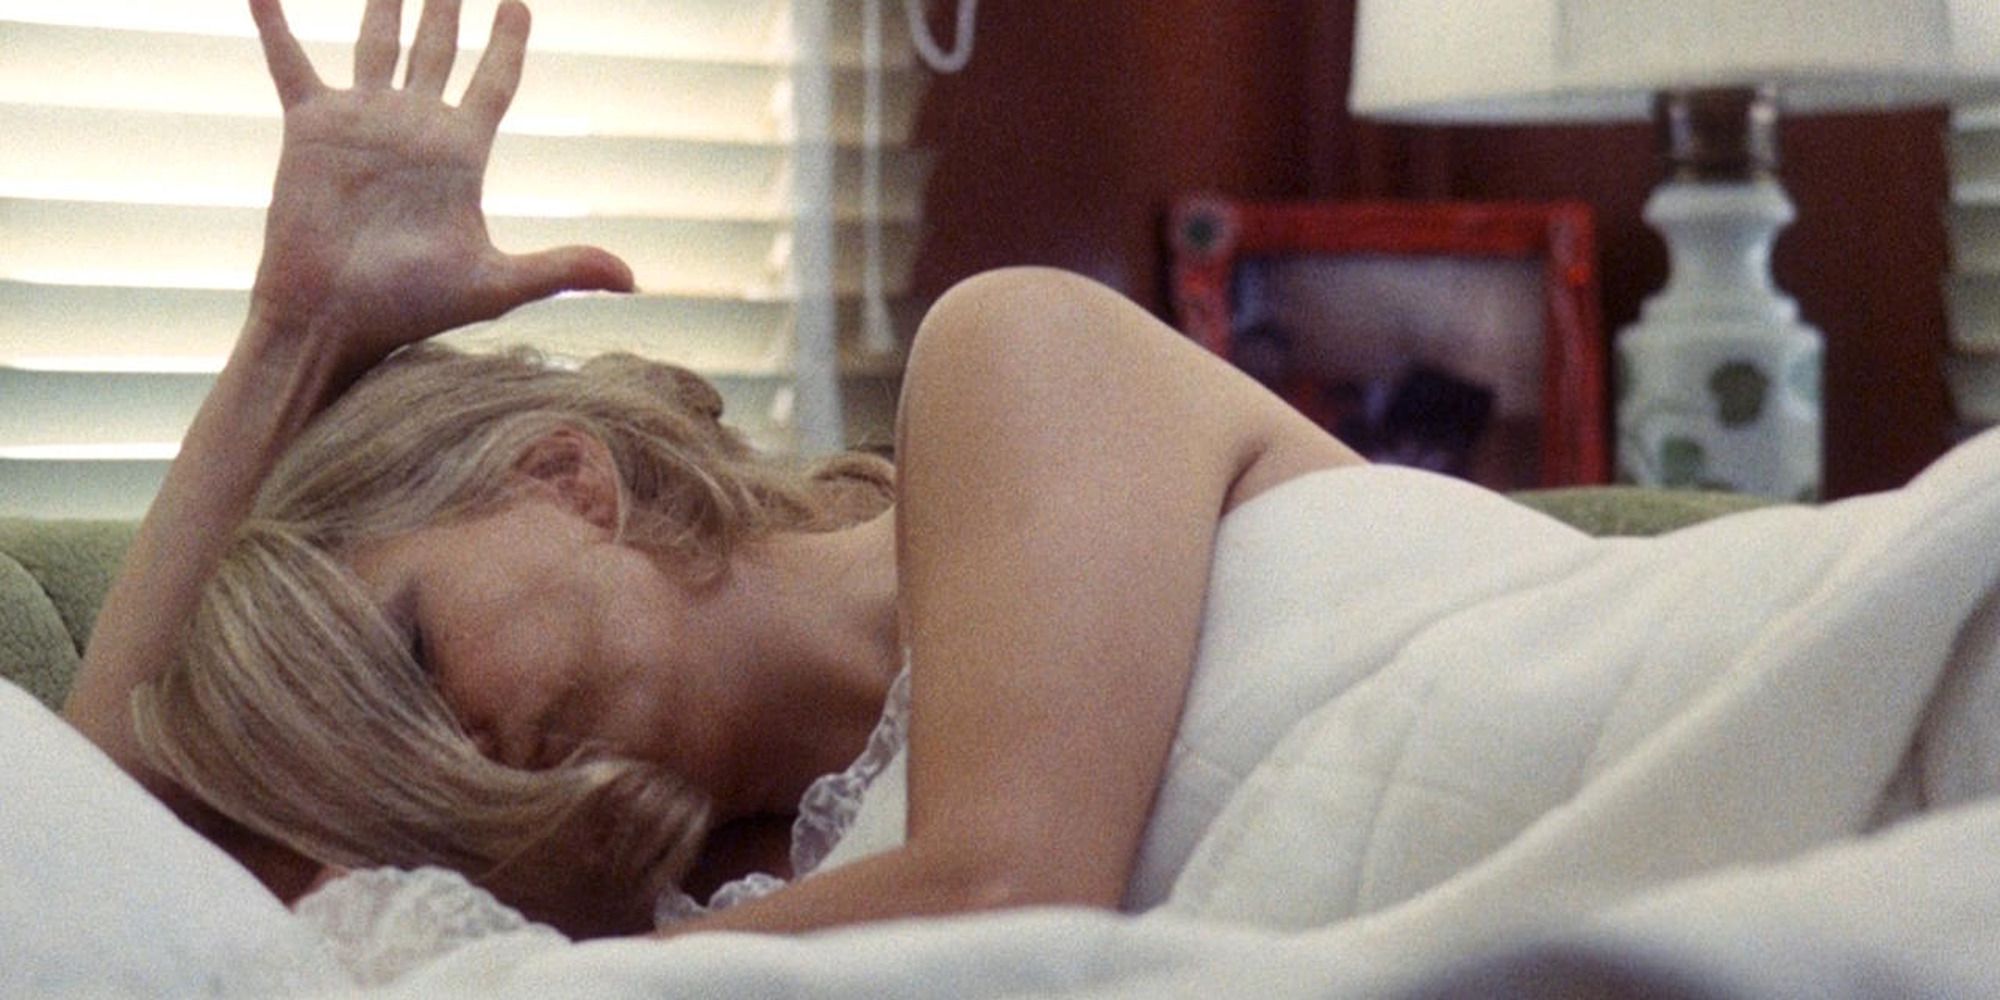 Gena Rowlands lying topless in bed, covered by bedsheets